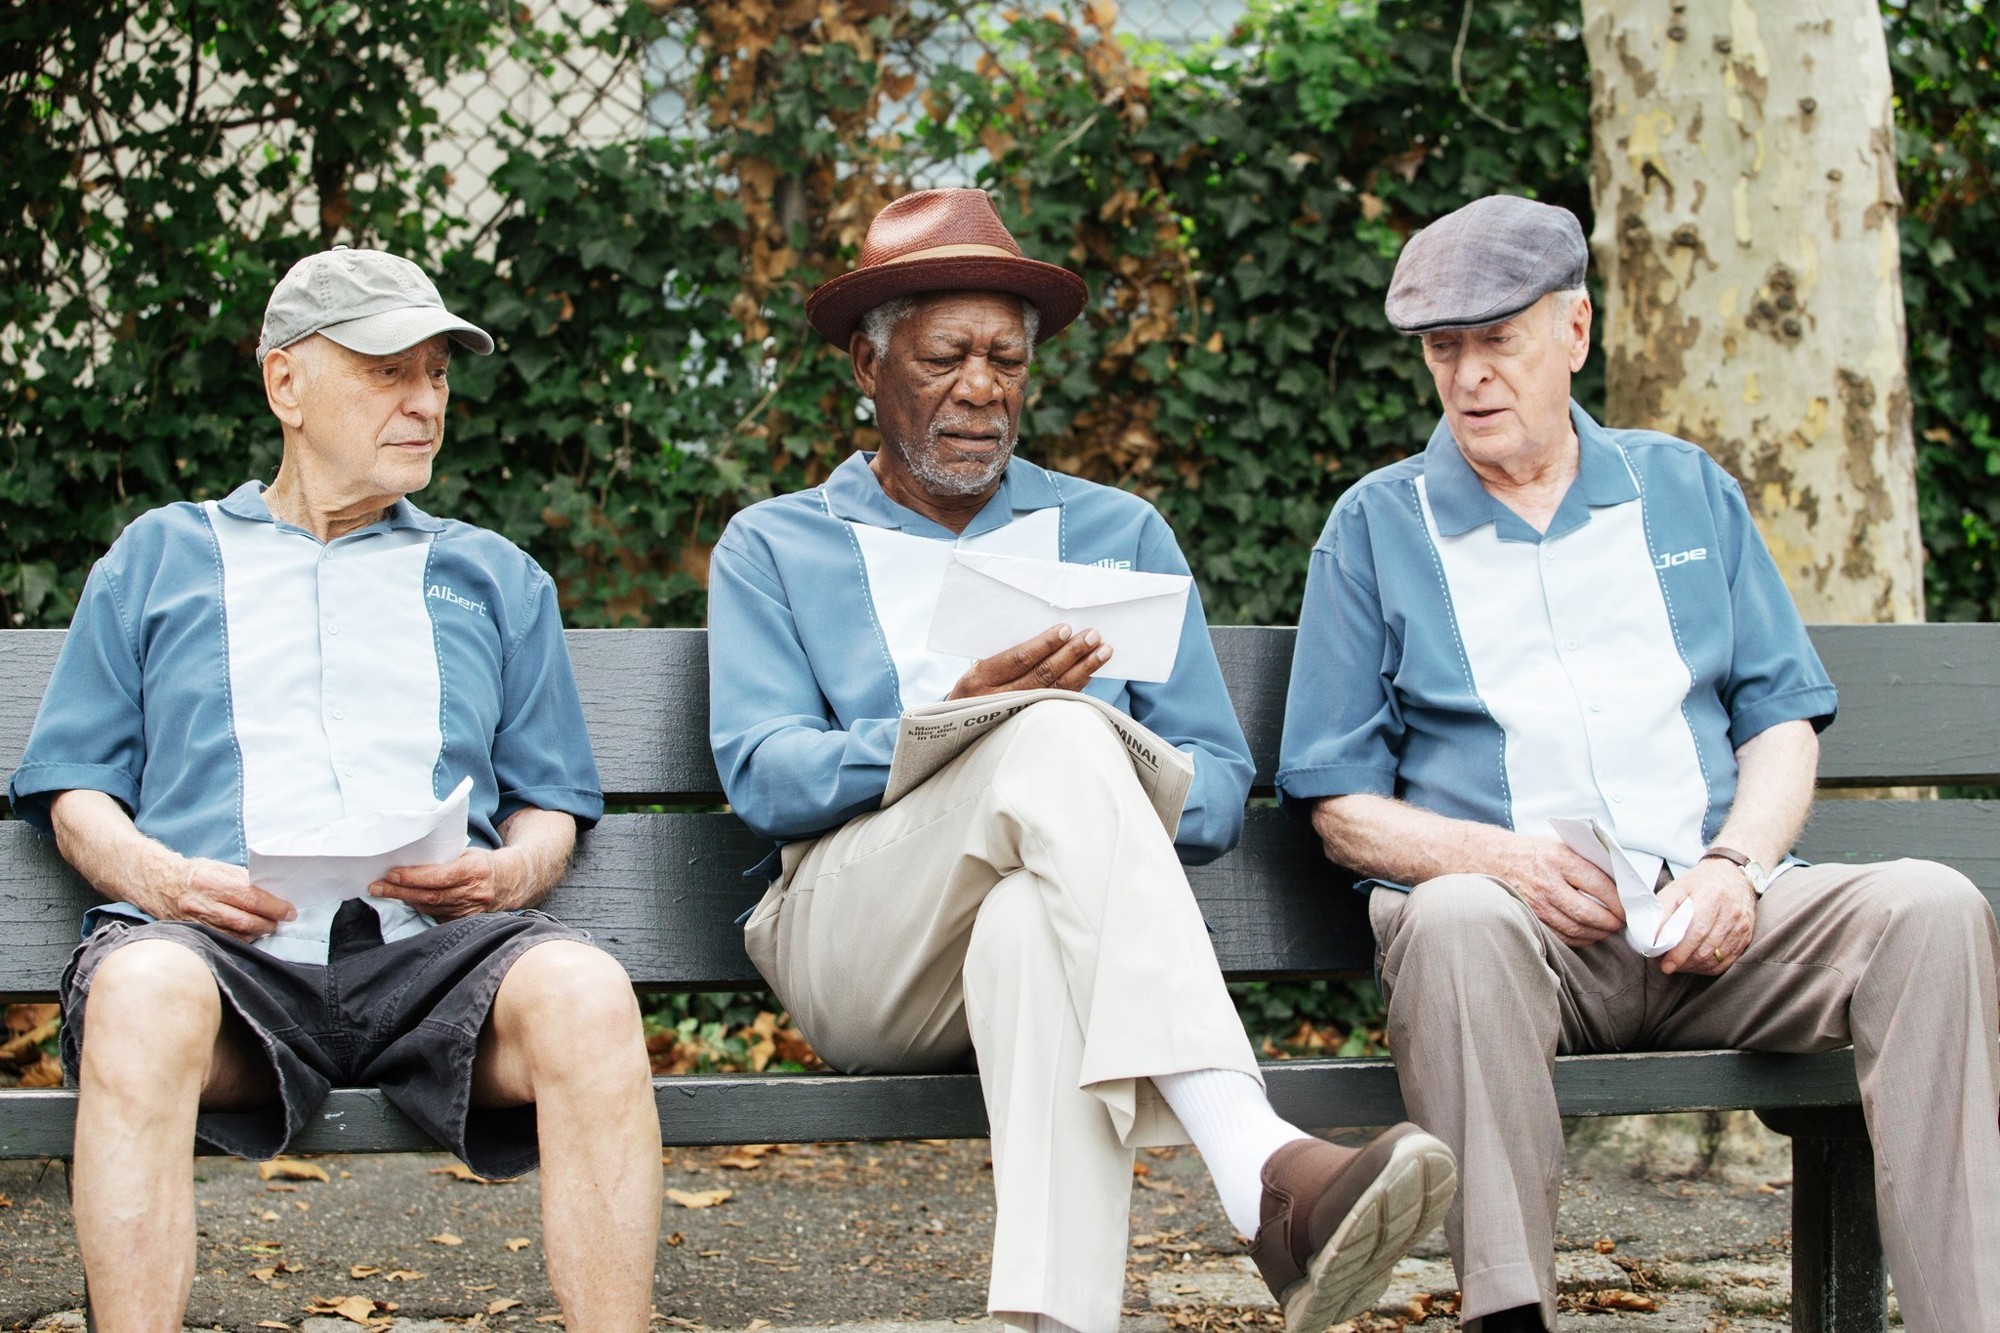 Alan Arkin, Morgan Freeman and Michael Caine in Warner Bros. Pictures' Going in Style (2017)